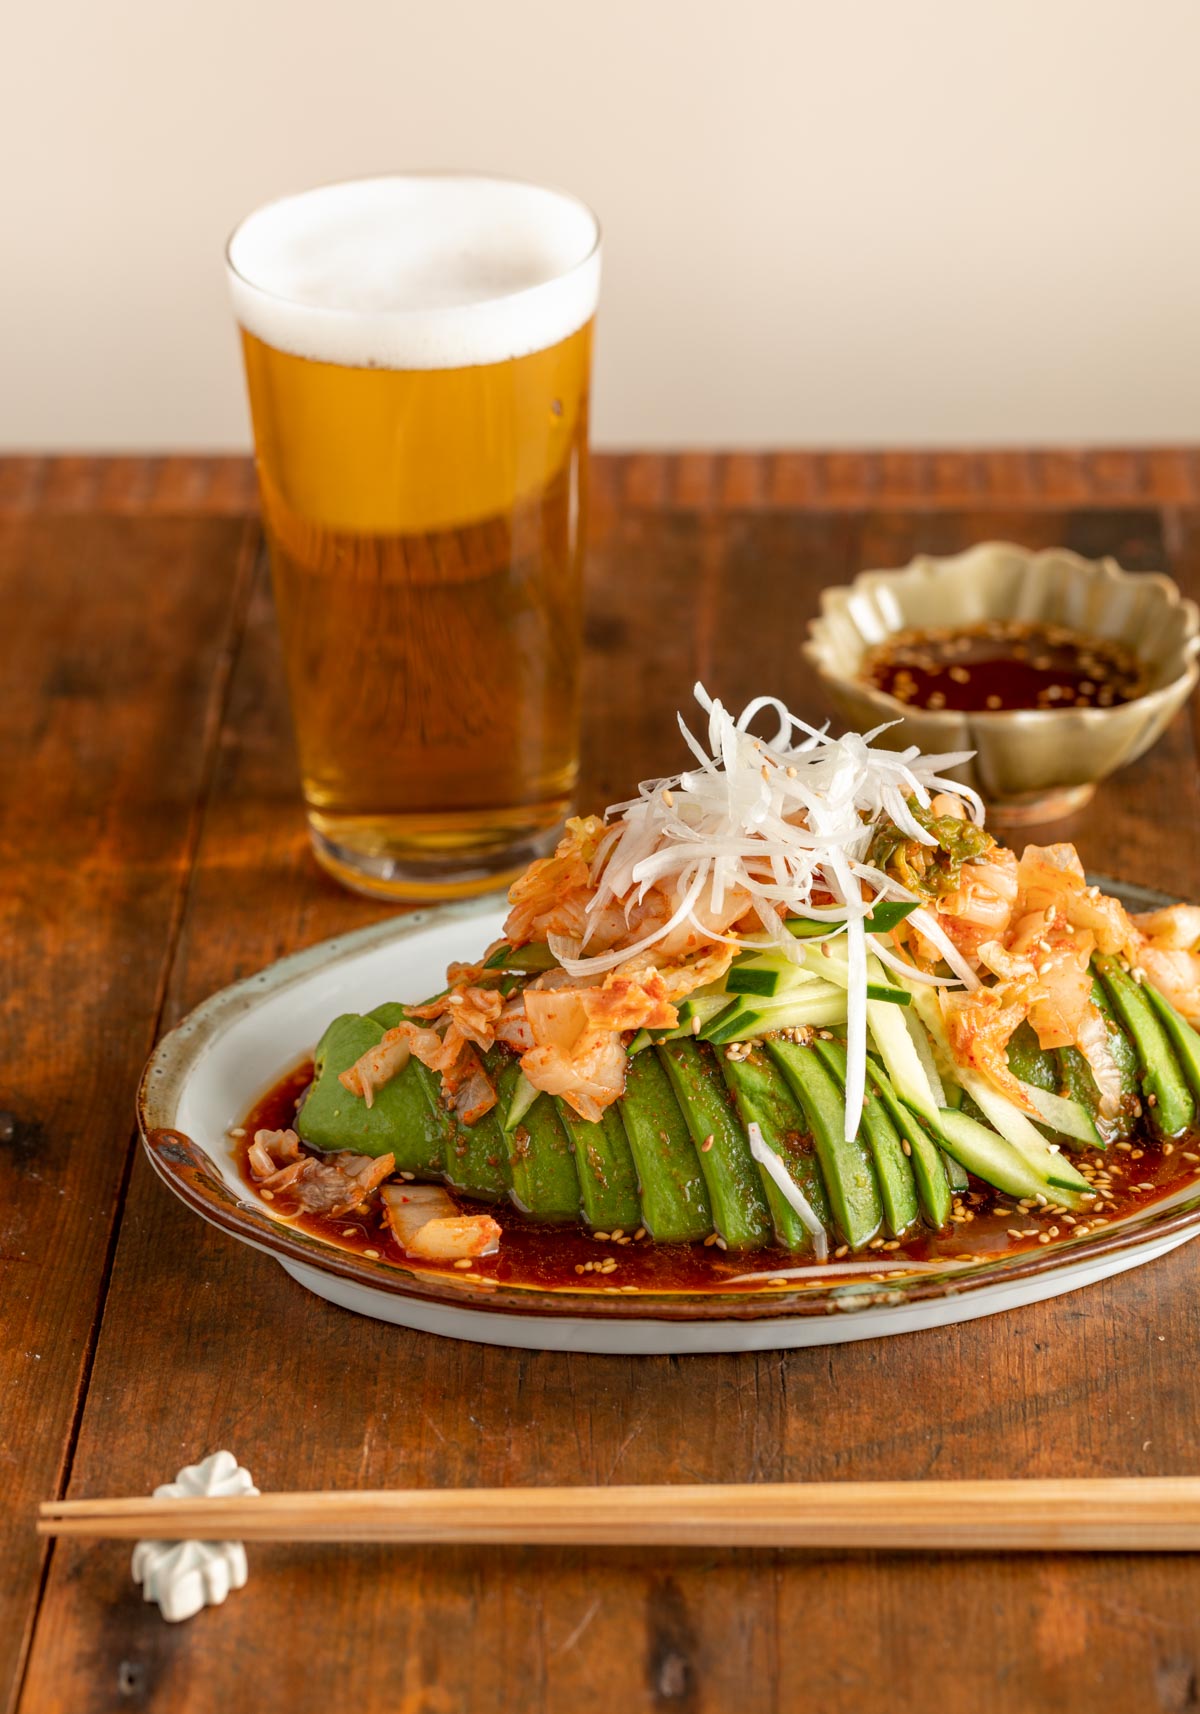 avocado kimchi with gochujang soy sauce with beer with chopstick